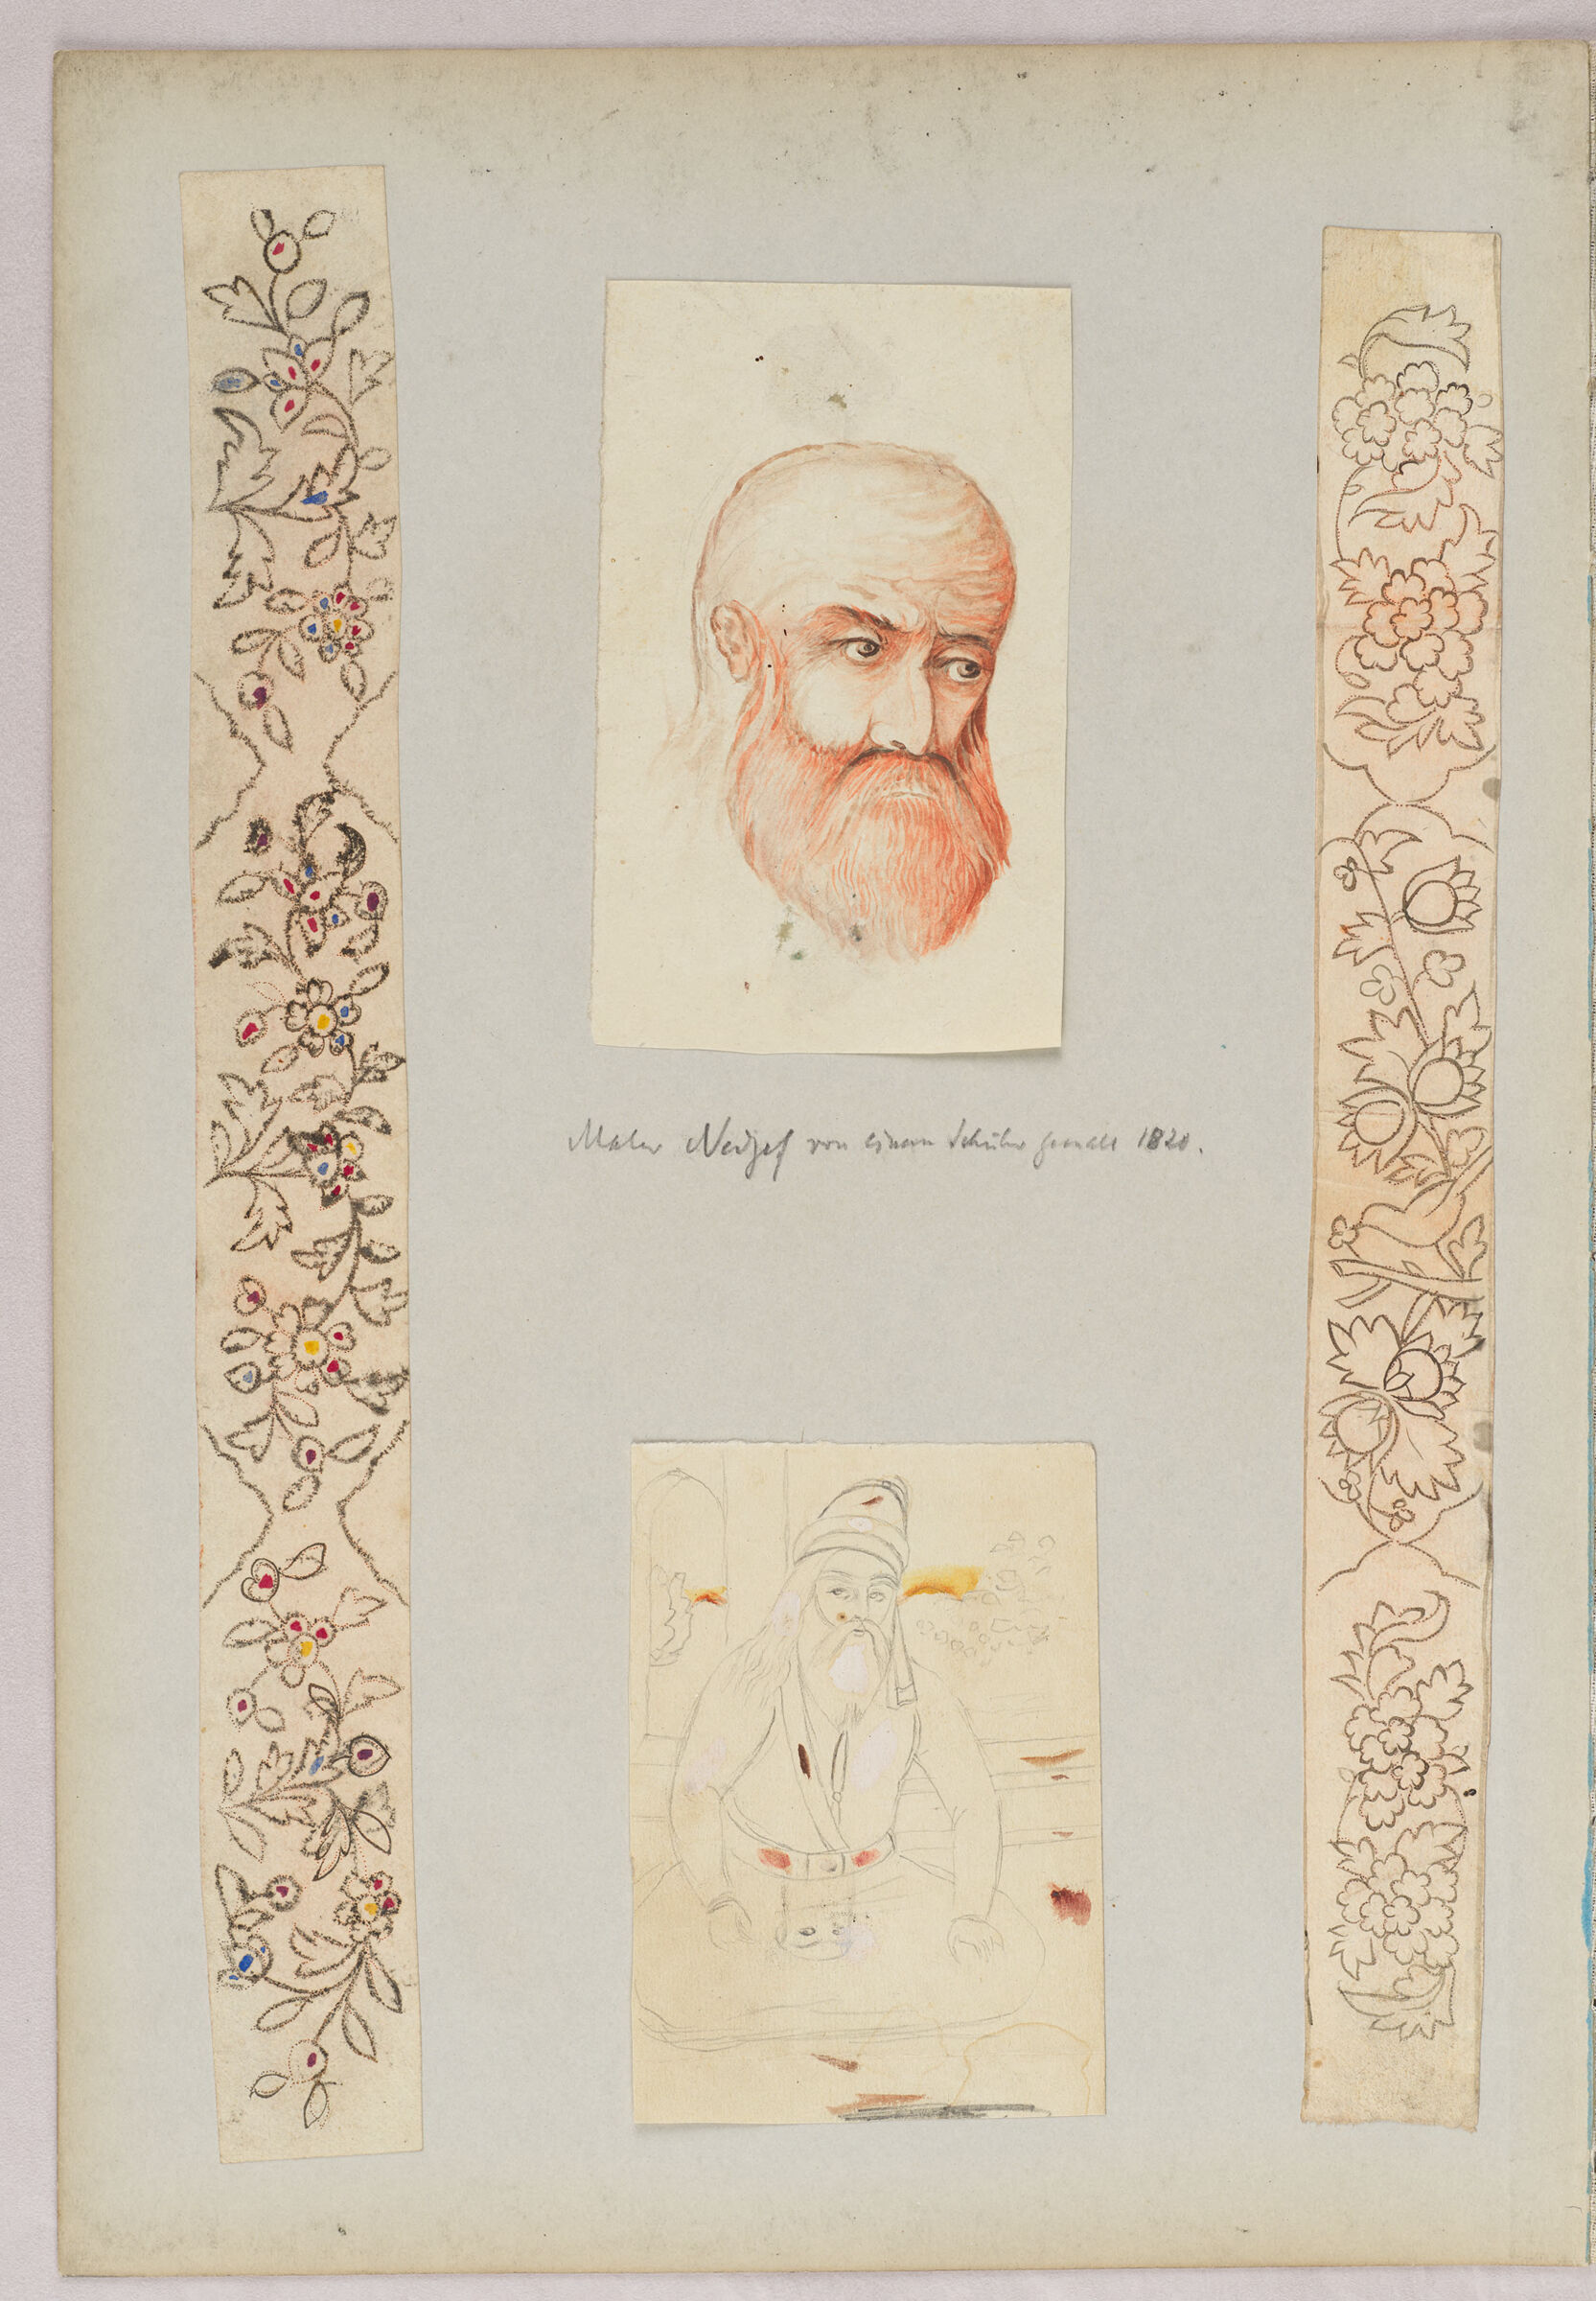 Folio 36 From An Album Of Drawings And Paintings: Four Drawings; Two Designs For Penboxes; Head Of A Bearded Man; Seated Dervish (Recto); Blank Page (Verso)